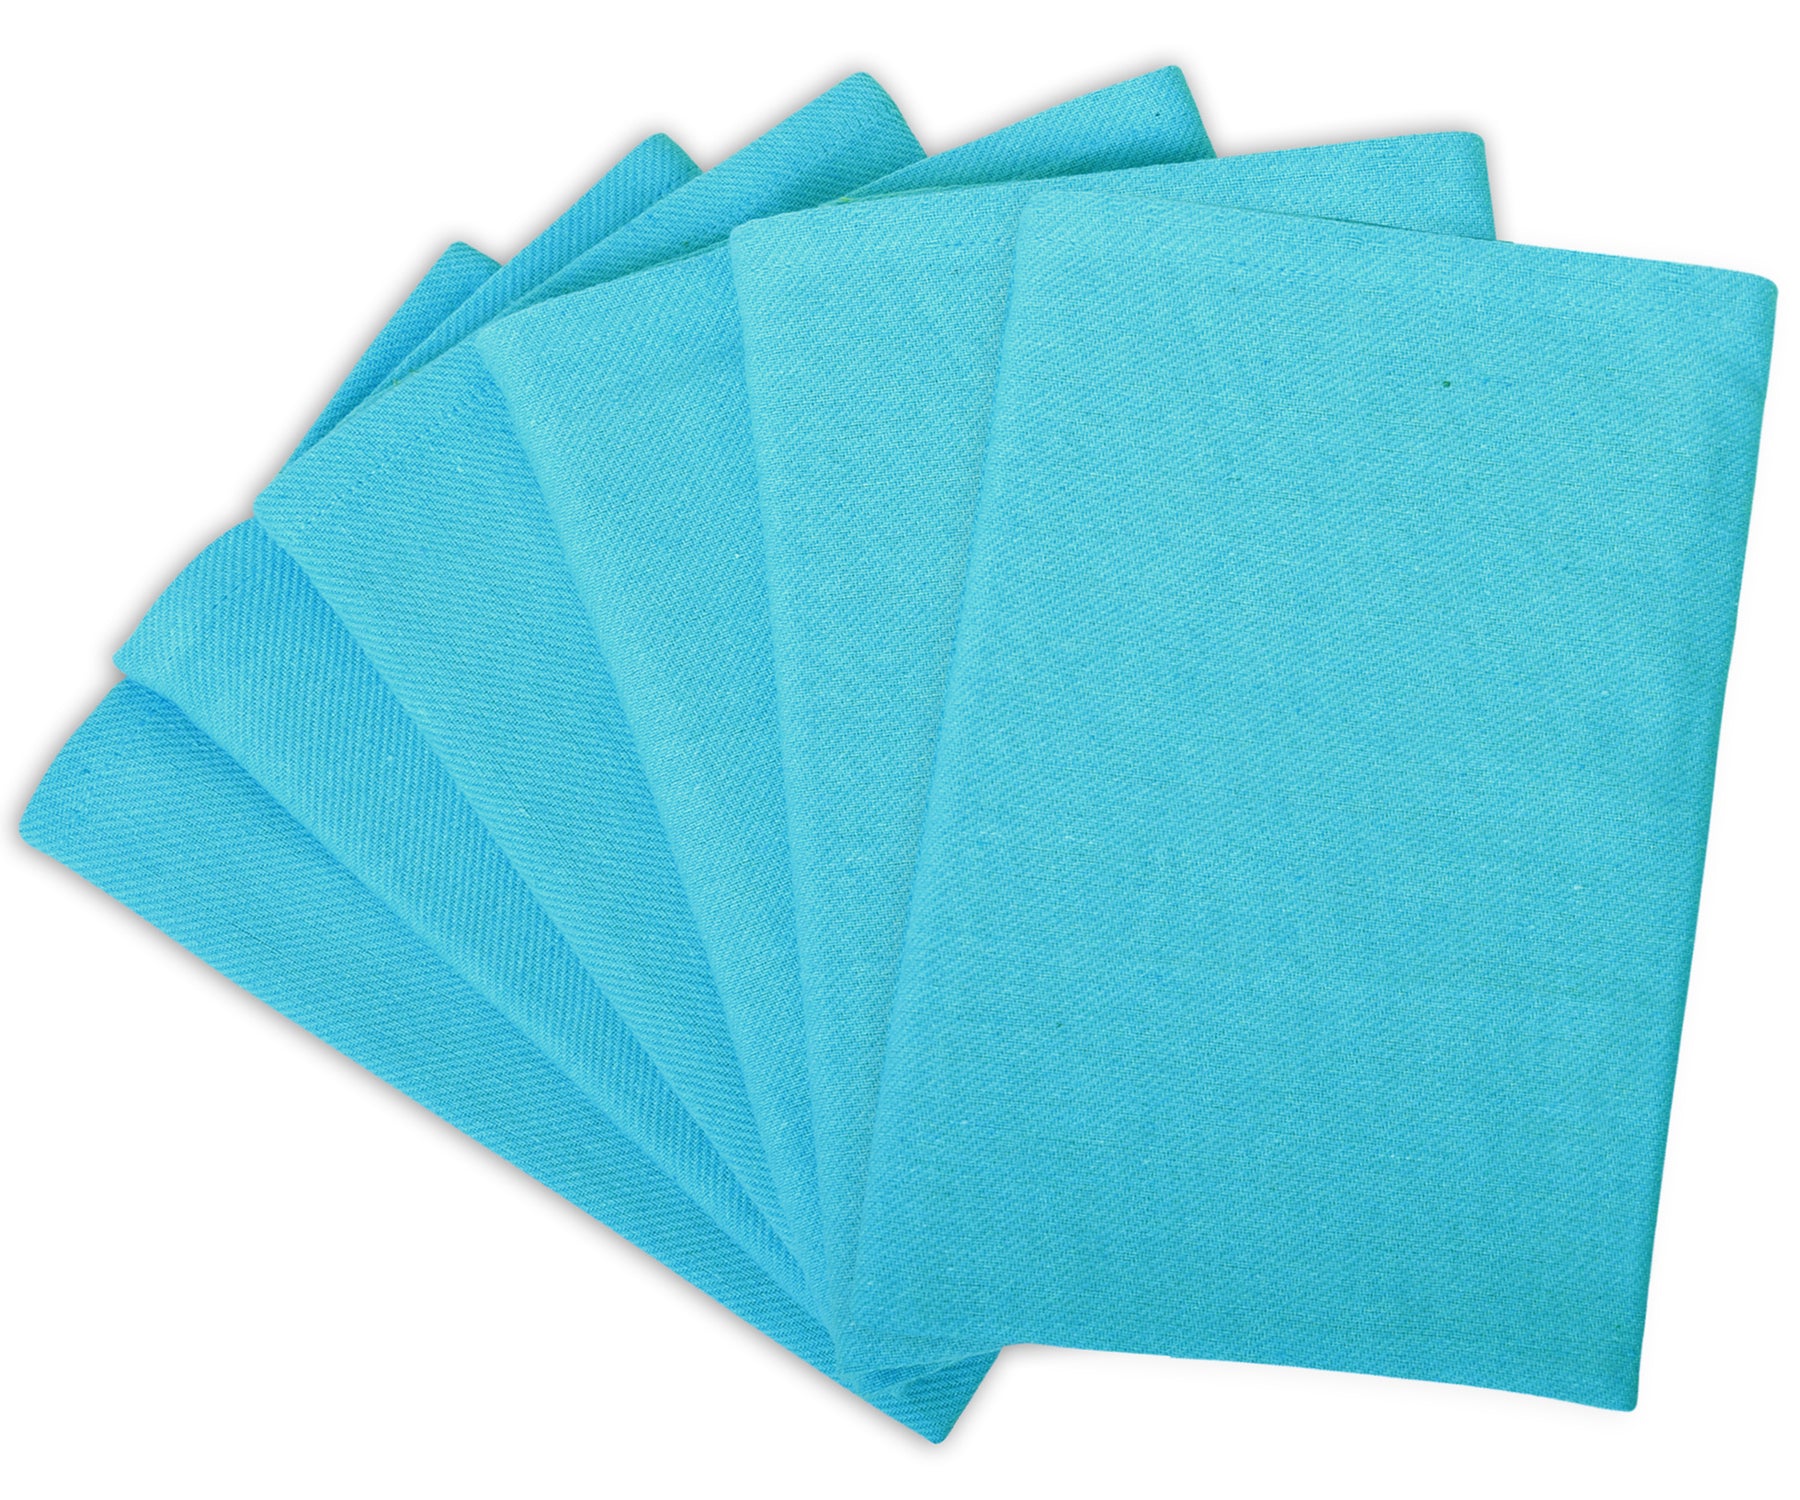 Teal Napkins - Elevate your table setting with these elegant teal napkins, perfect for adding a pop of color to any occasion.